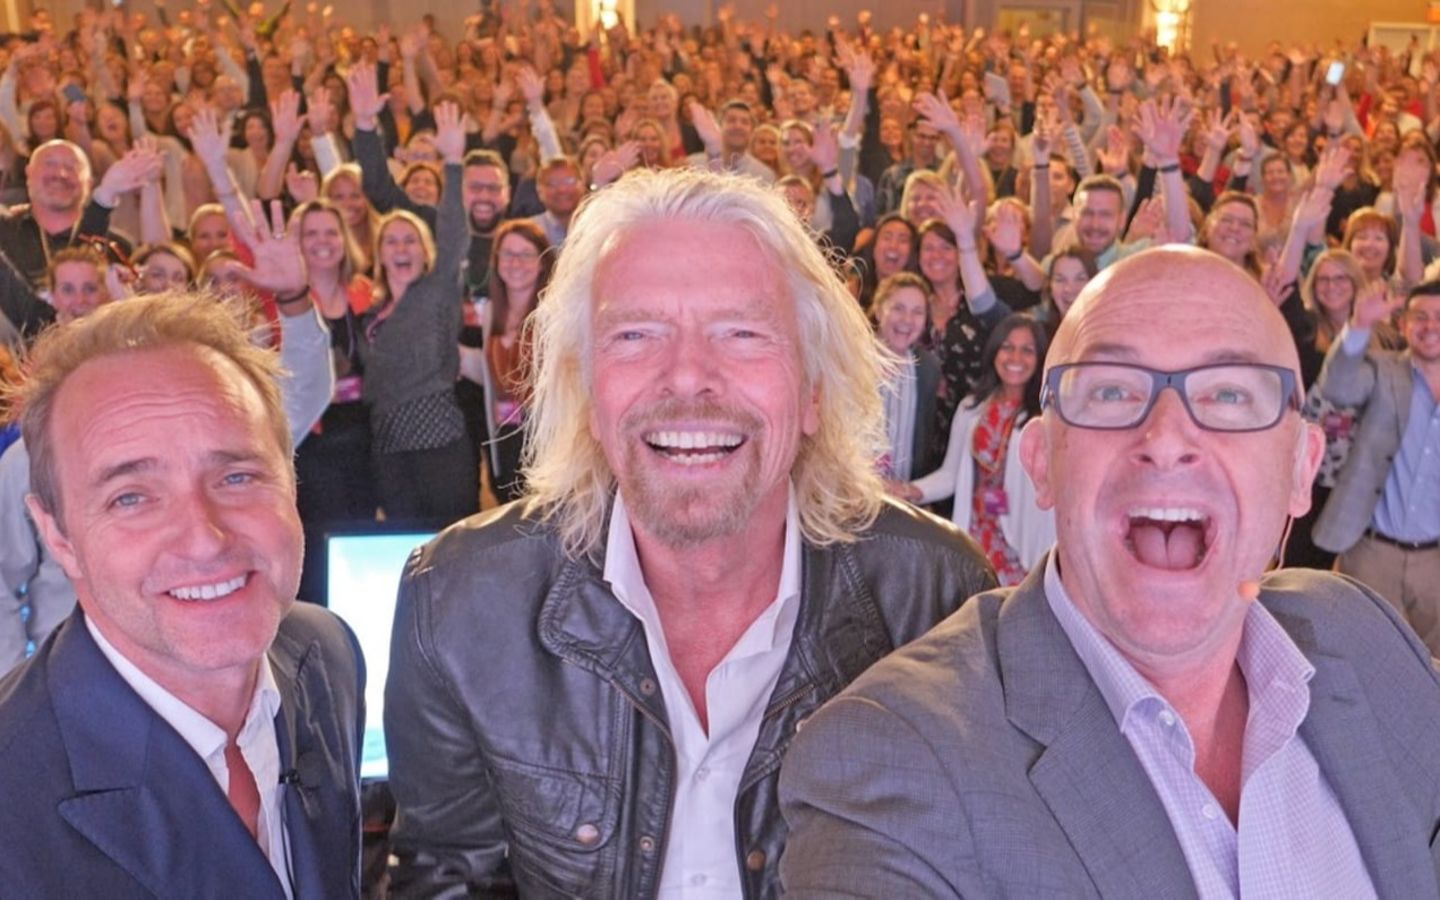 Dave Osborne, Richard Branson and Mark Jeffries take a selfie on stage at the Virgin Pulse Thrive Summit in New Orleans